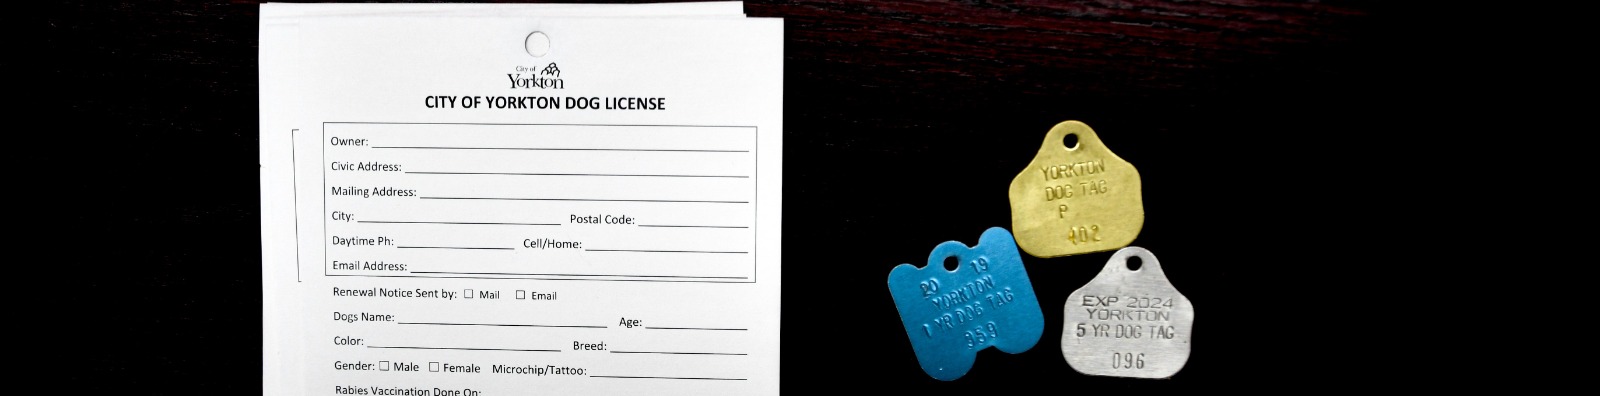 Dog licence tags and form